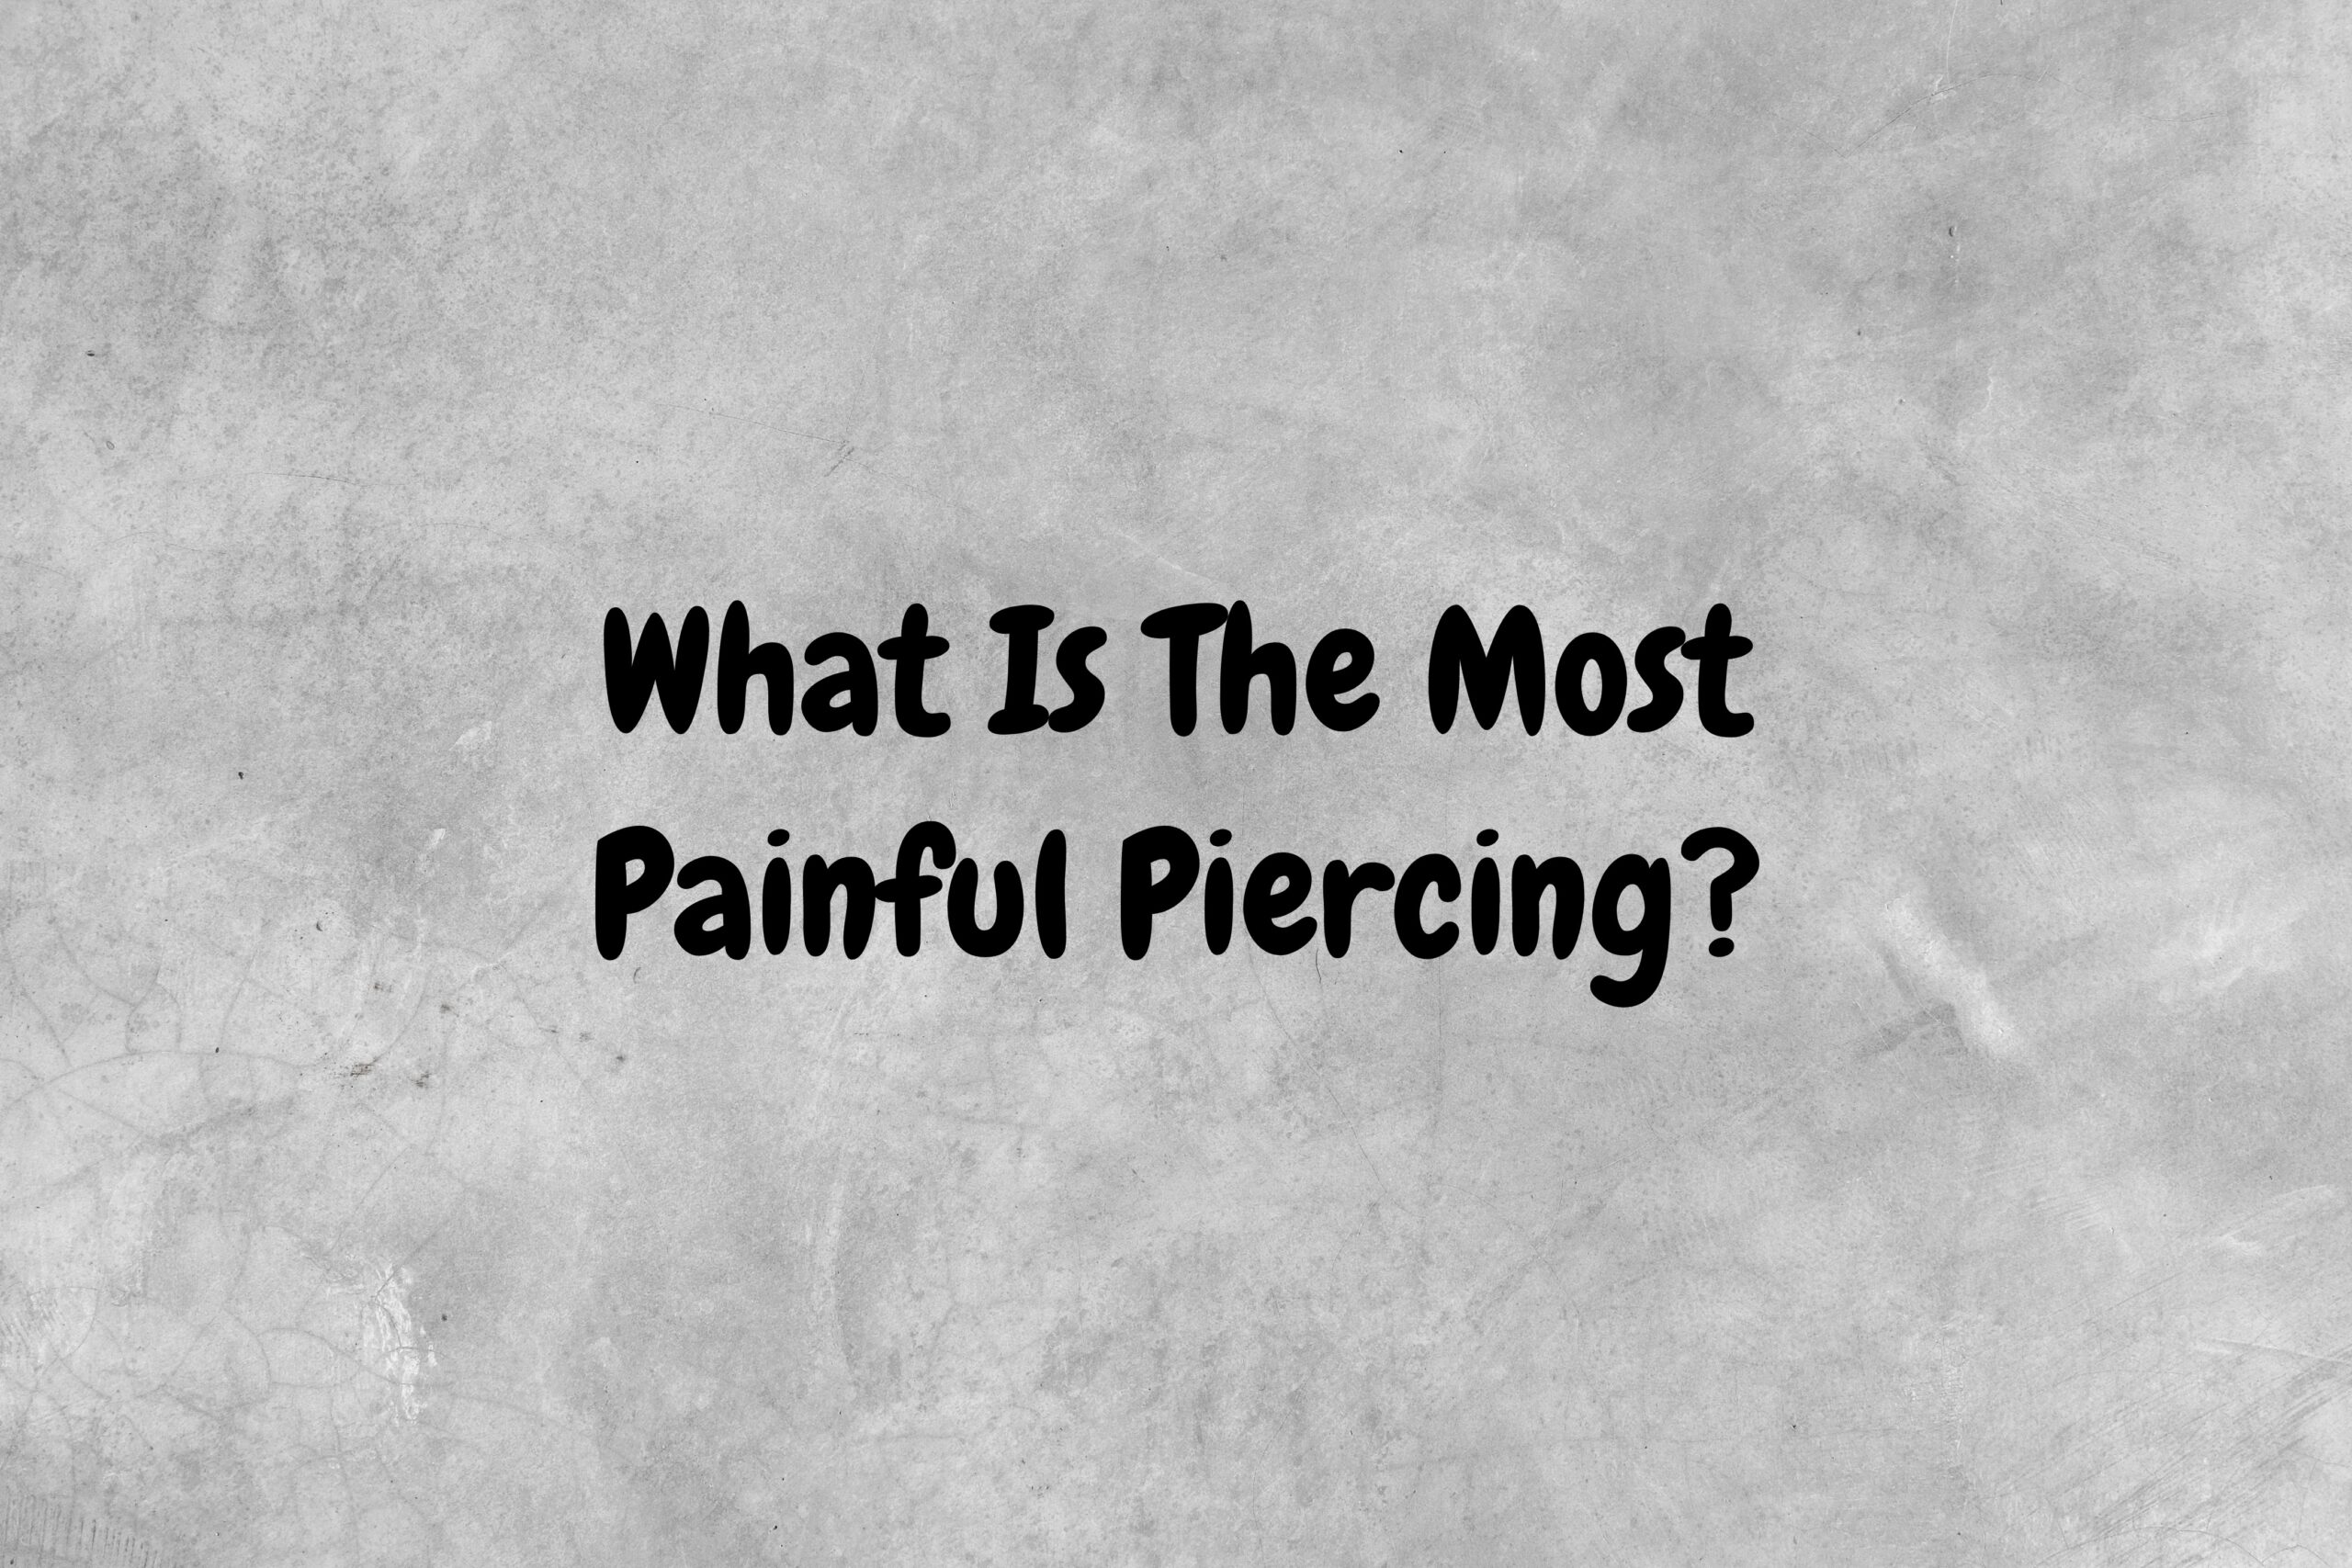 What Is The Most Painful Piercing?